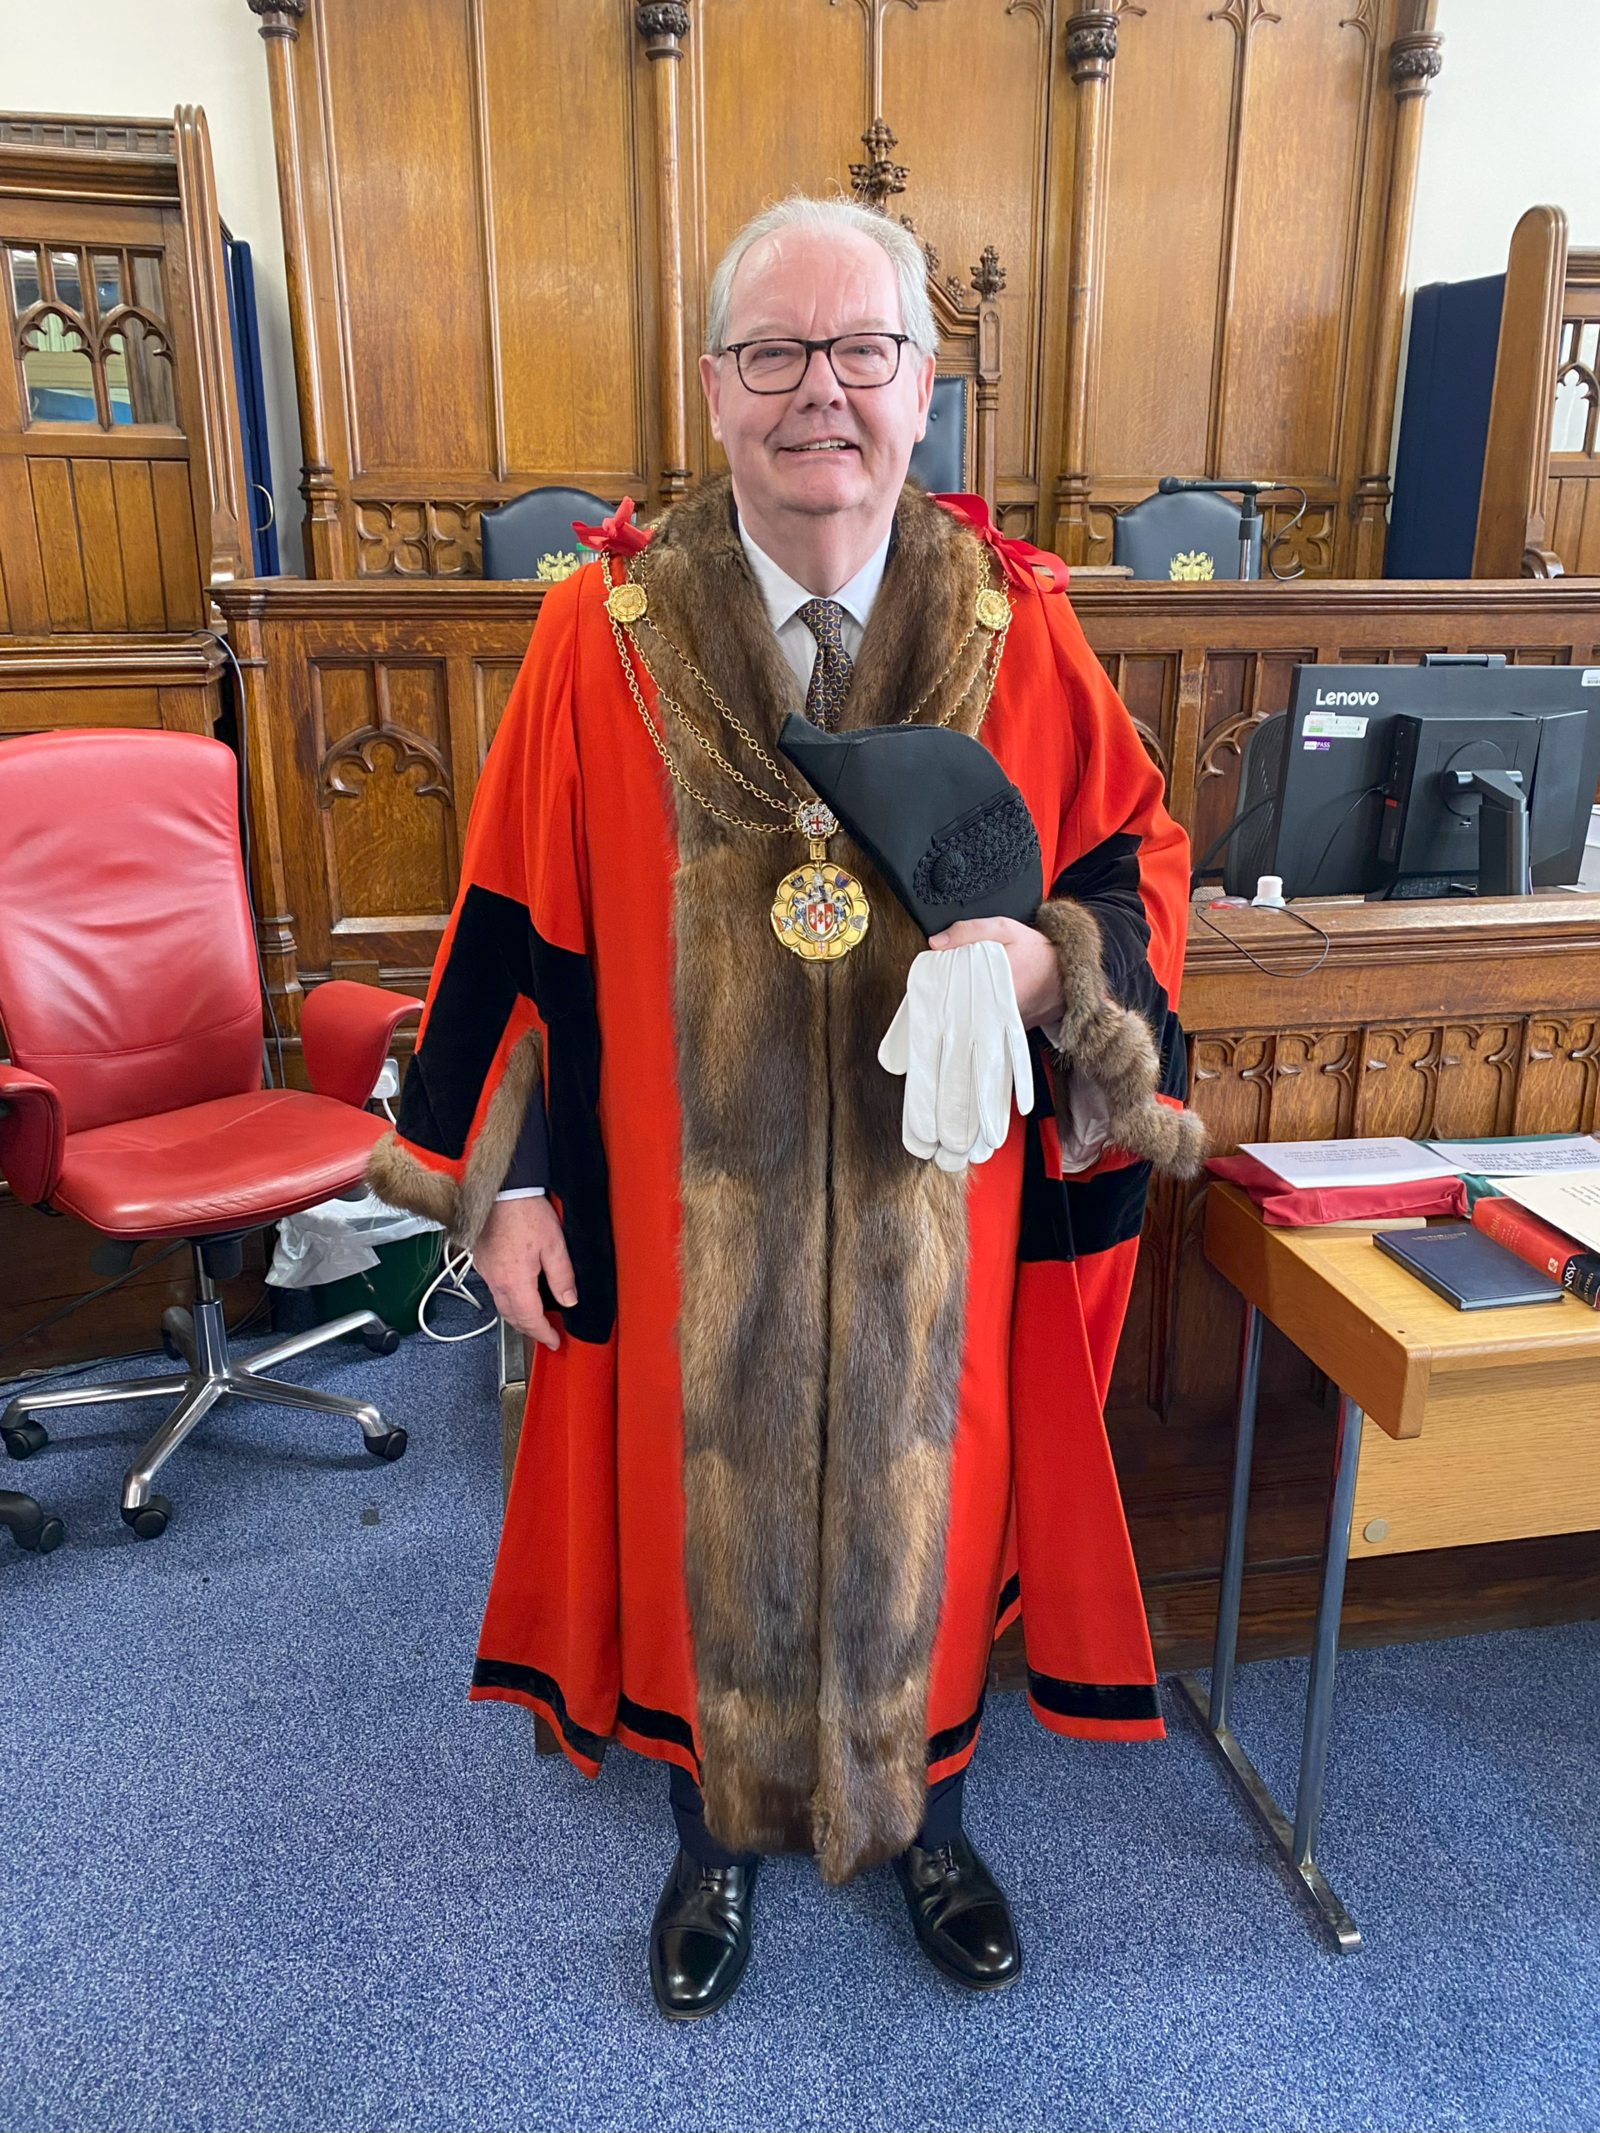 23 May 2023 - Strangely historic to attend the Formal Opening of The Mayor’s and City of London Court.